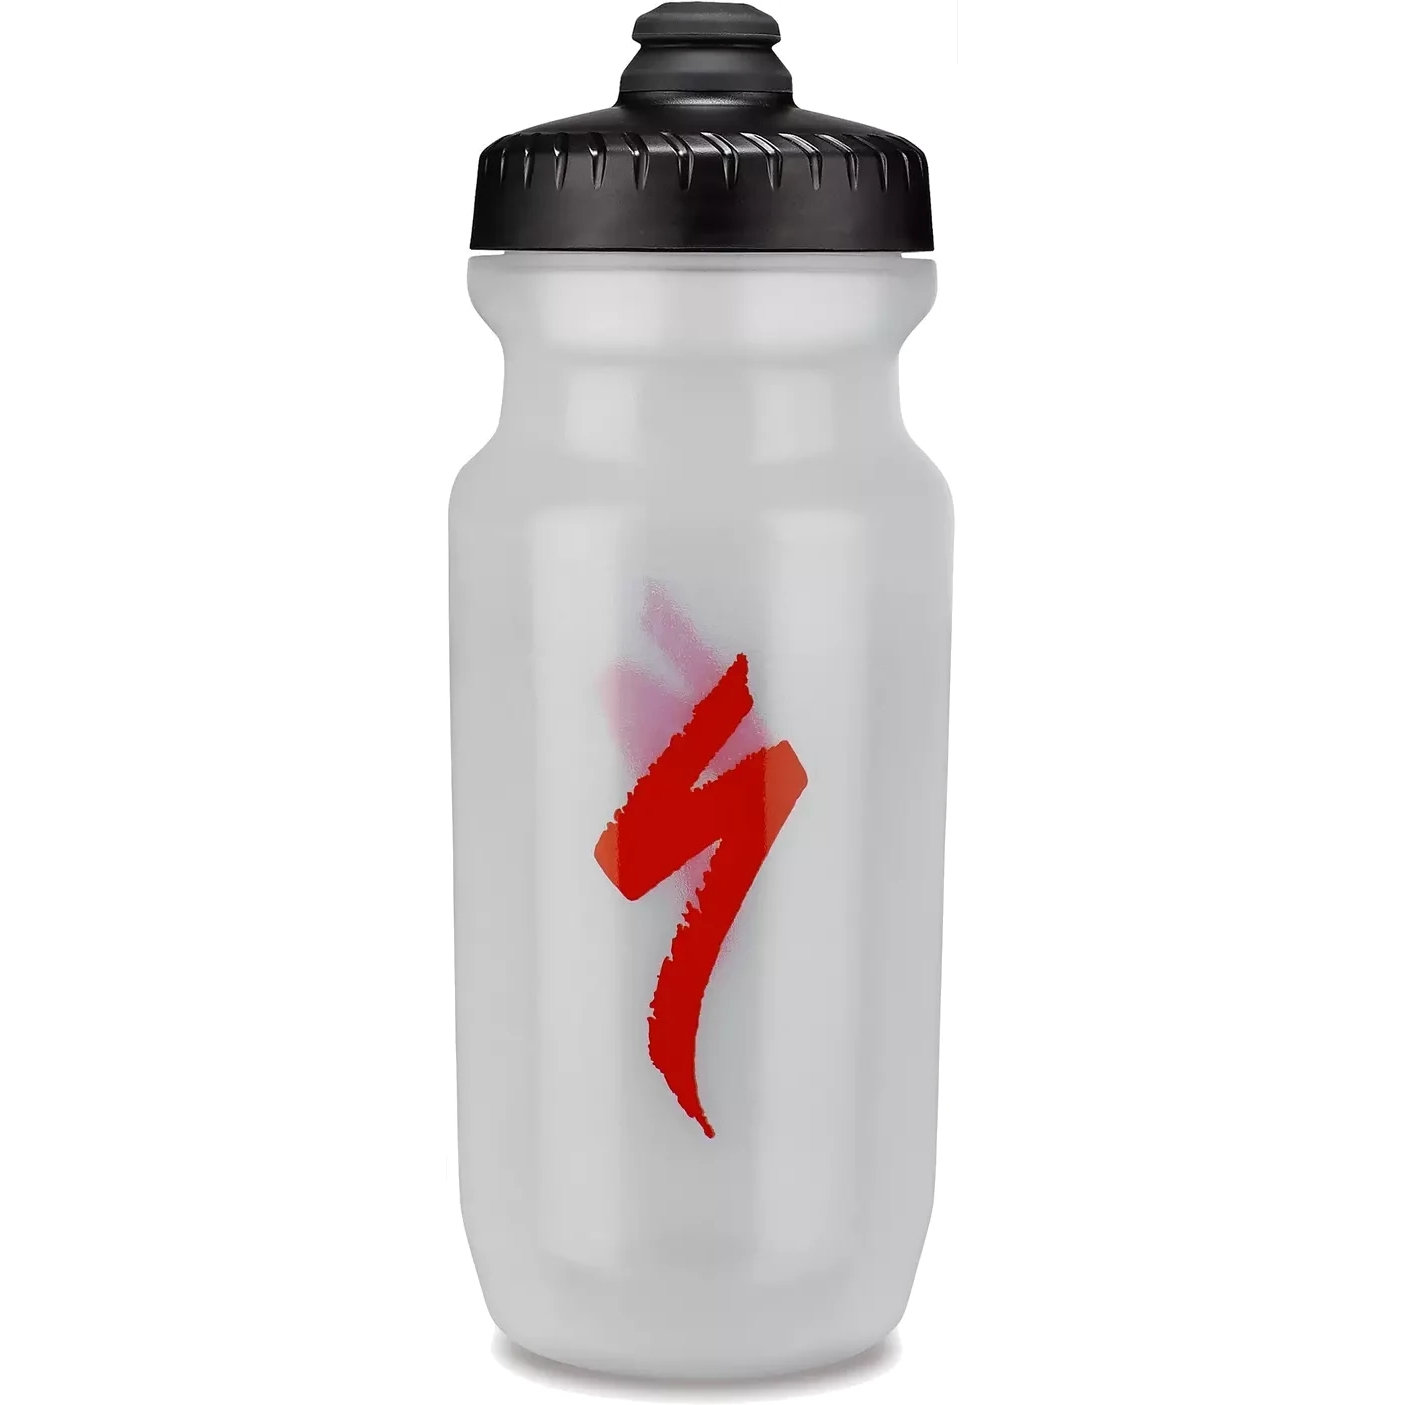 Productfoto van Specialized Little Big Mouth 2nd Gen Drinkfles 600ml - S-Logo Translucent